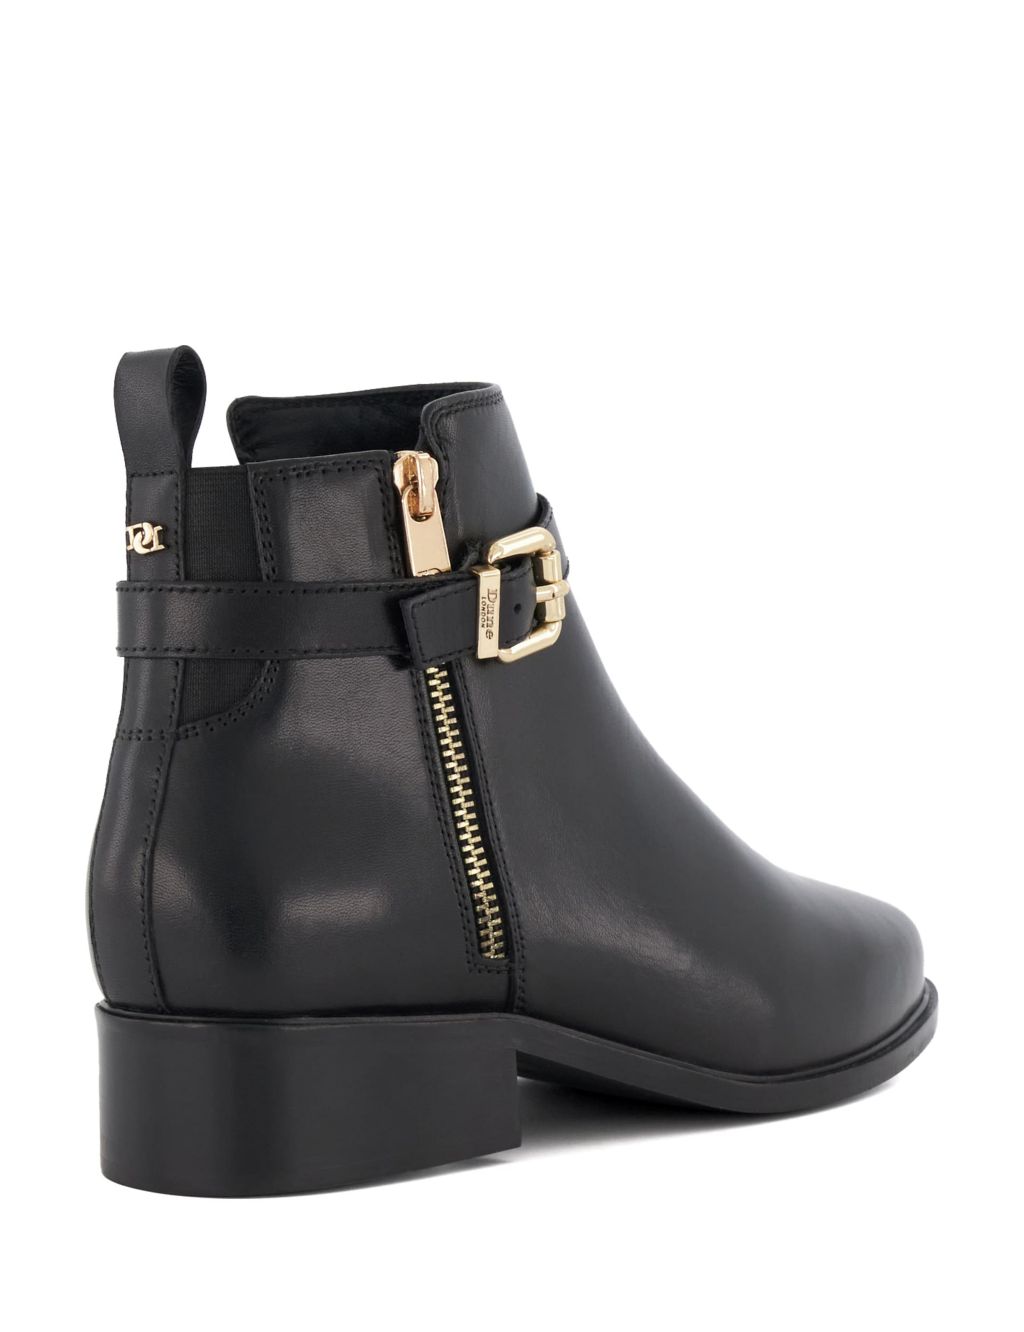 Leather Buckle Ankle Boots image 3